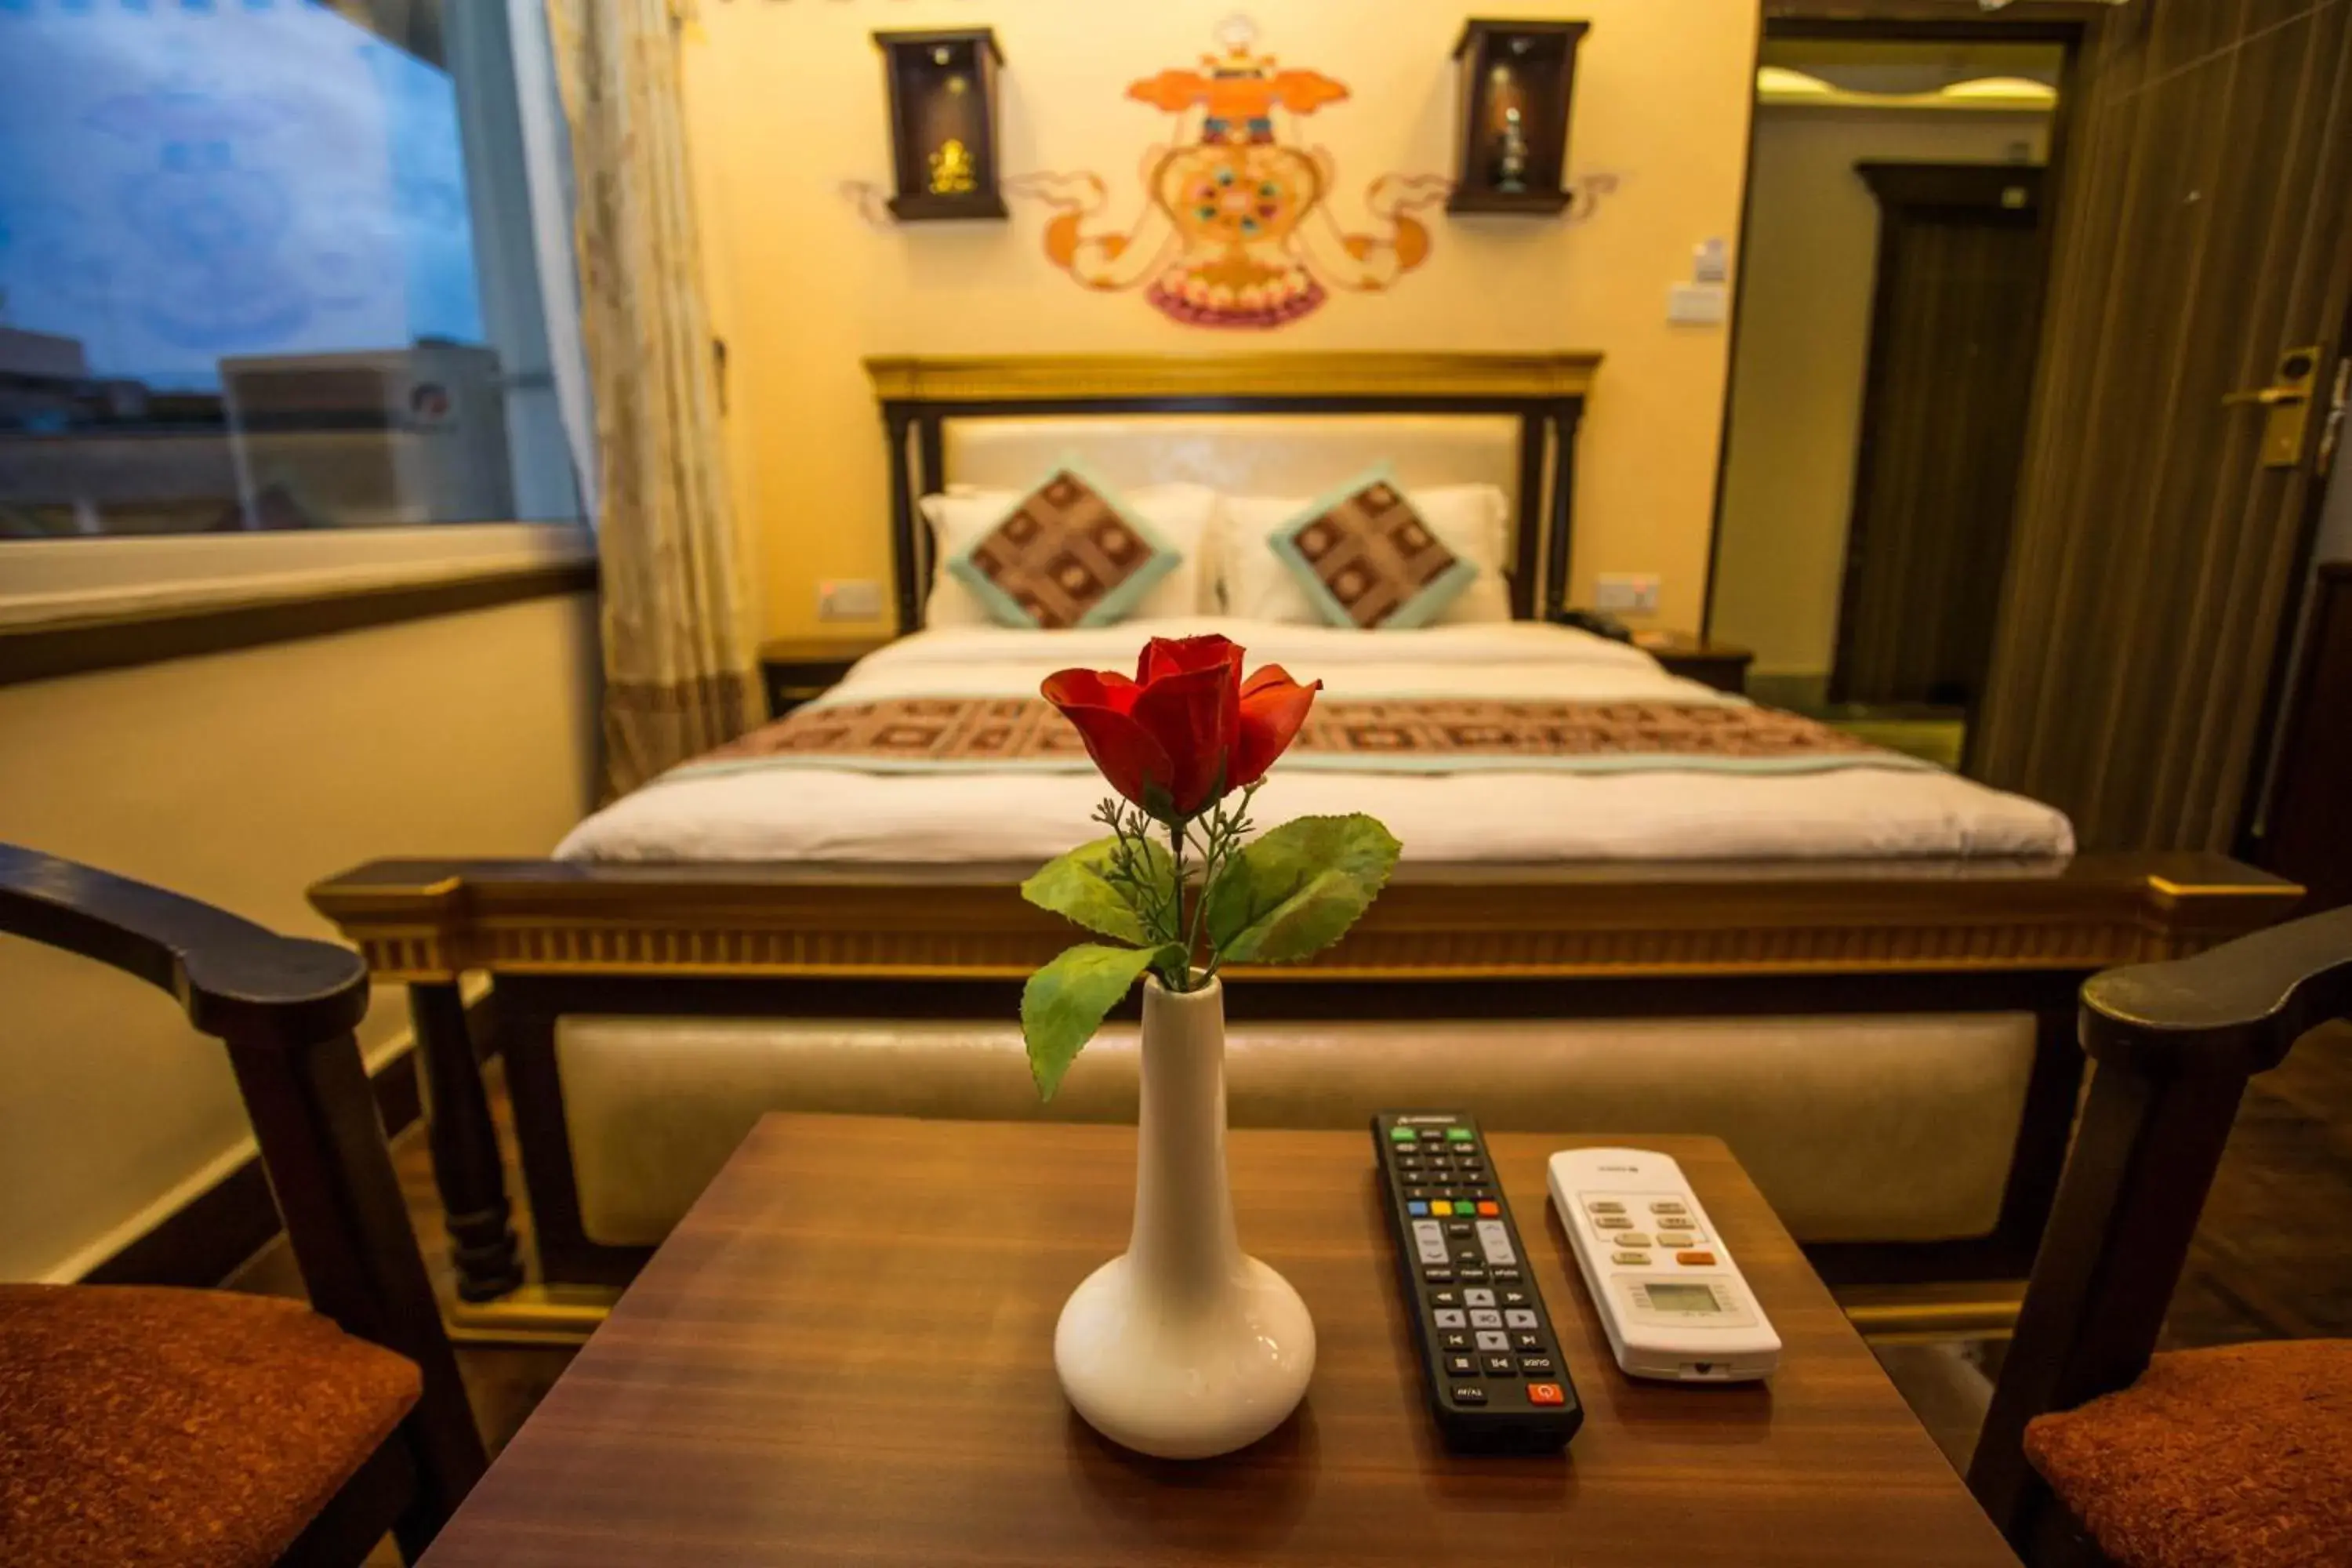 Bed, Room Photo in Hotel Encounter Nepal